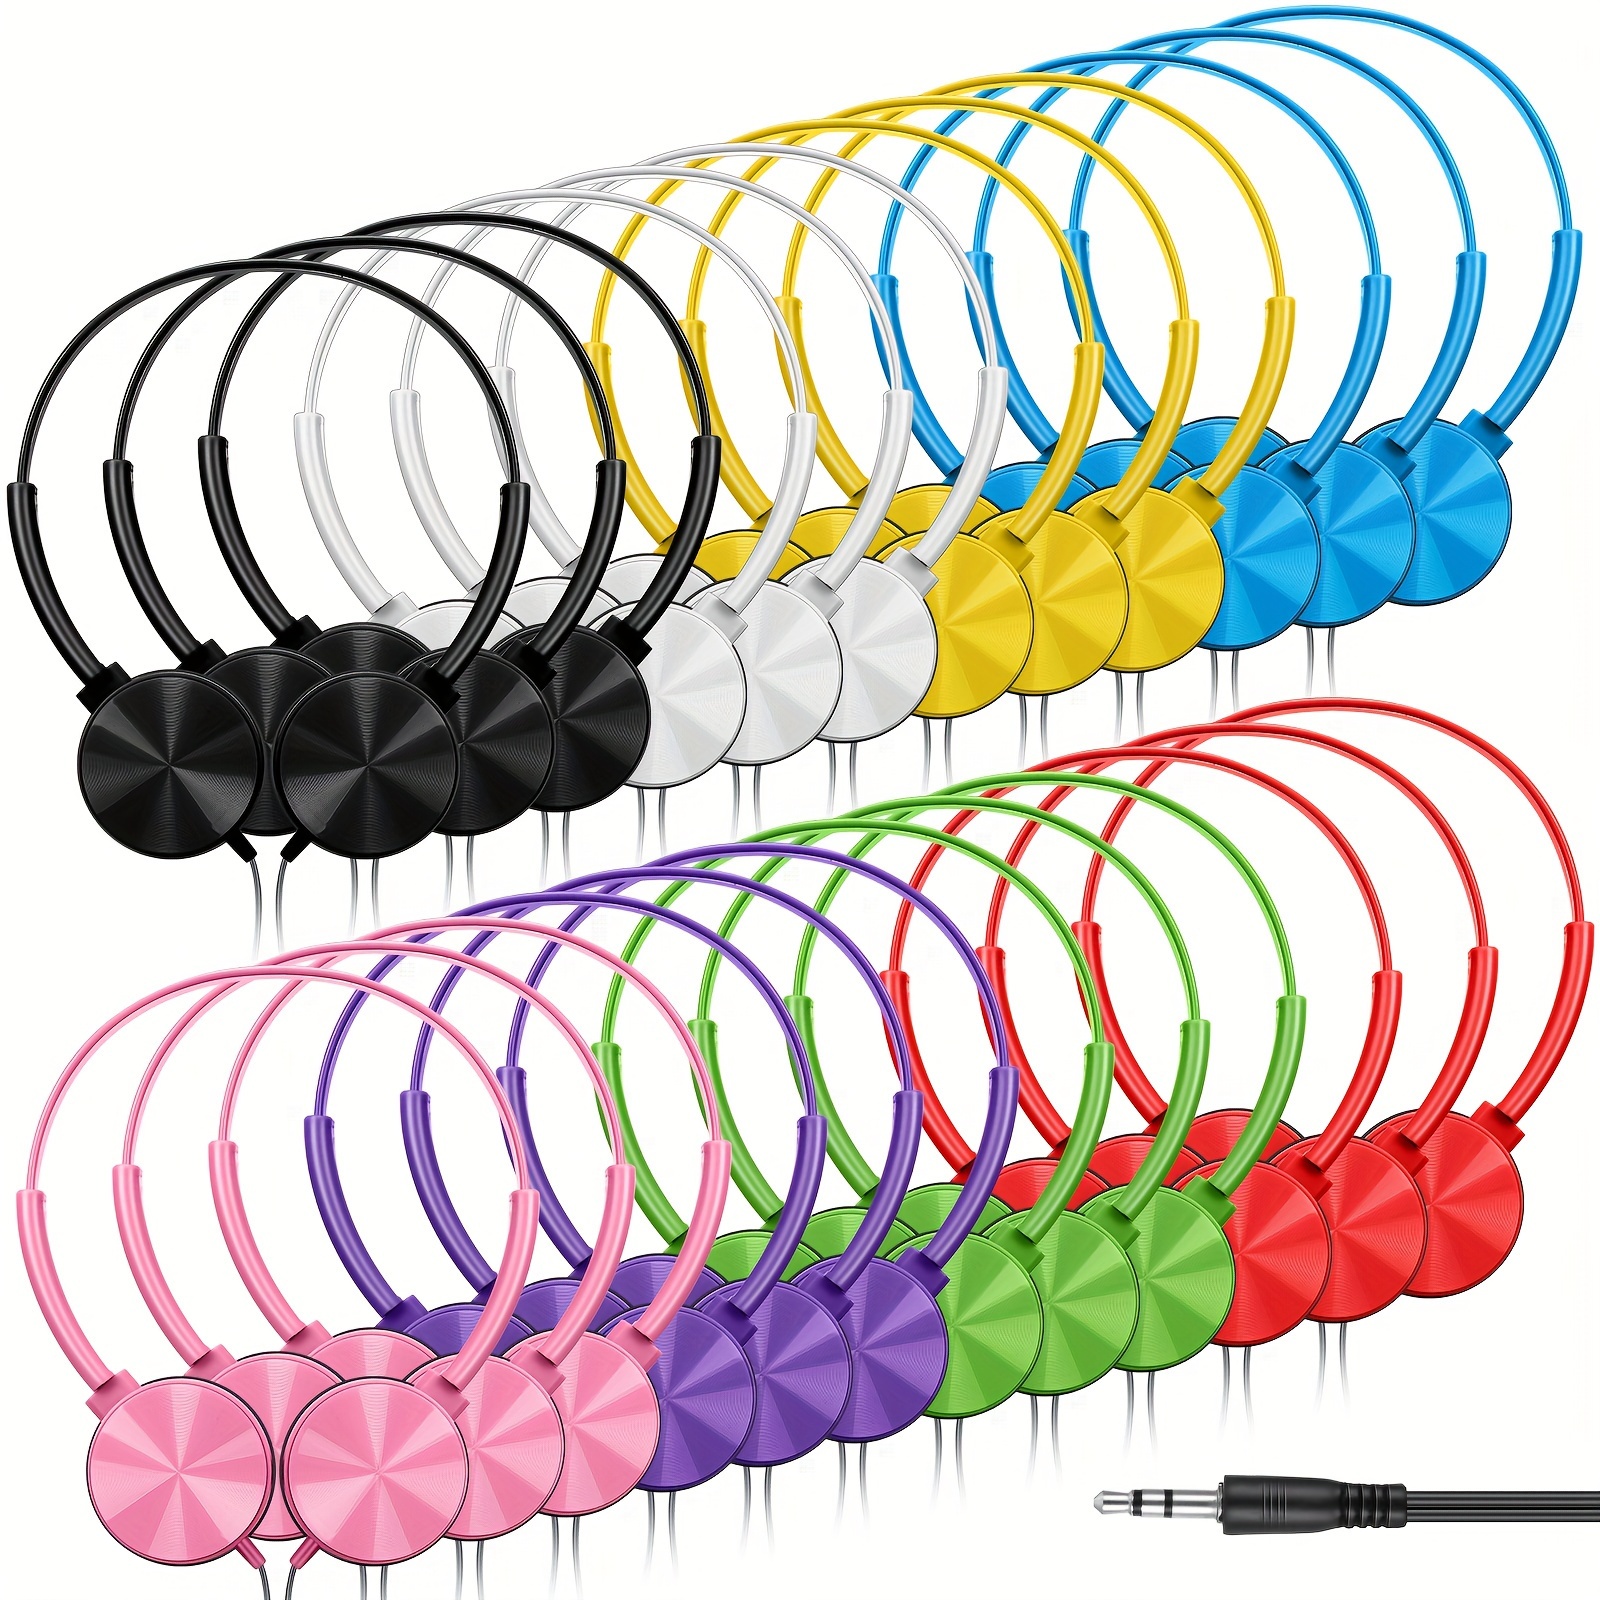 

24 Pack Bulk Headphones For Kids School Classroom Headphones Earphones With 3.5 Mm Plug, 8 Colors Adjustable Over Head Earbuds Headphones For Students Adults Kids Library Travel, Individually Bagged